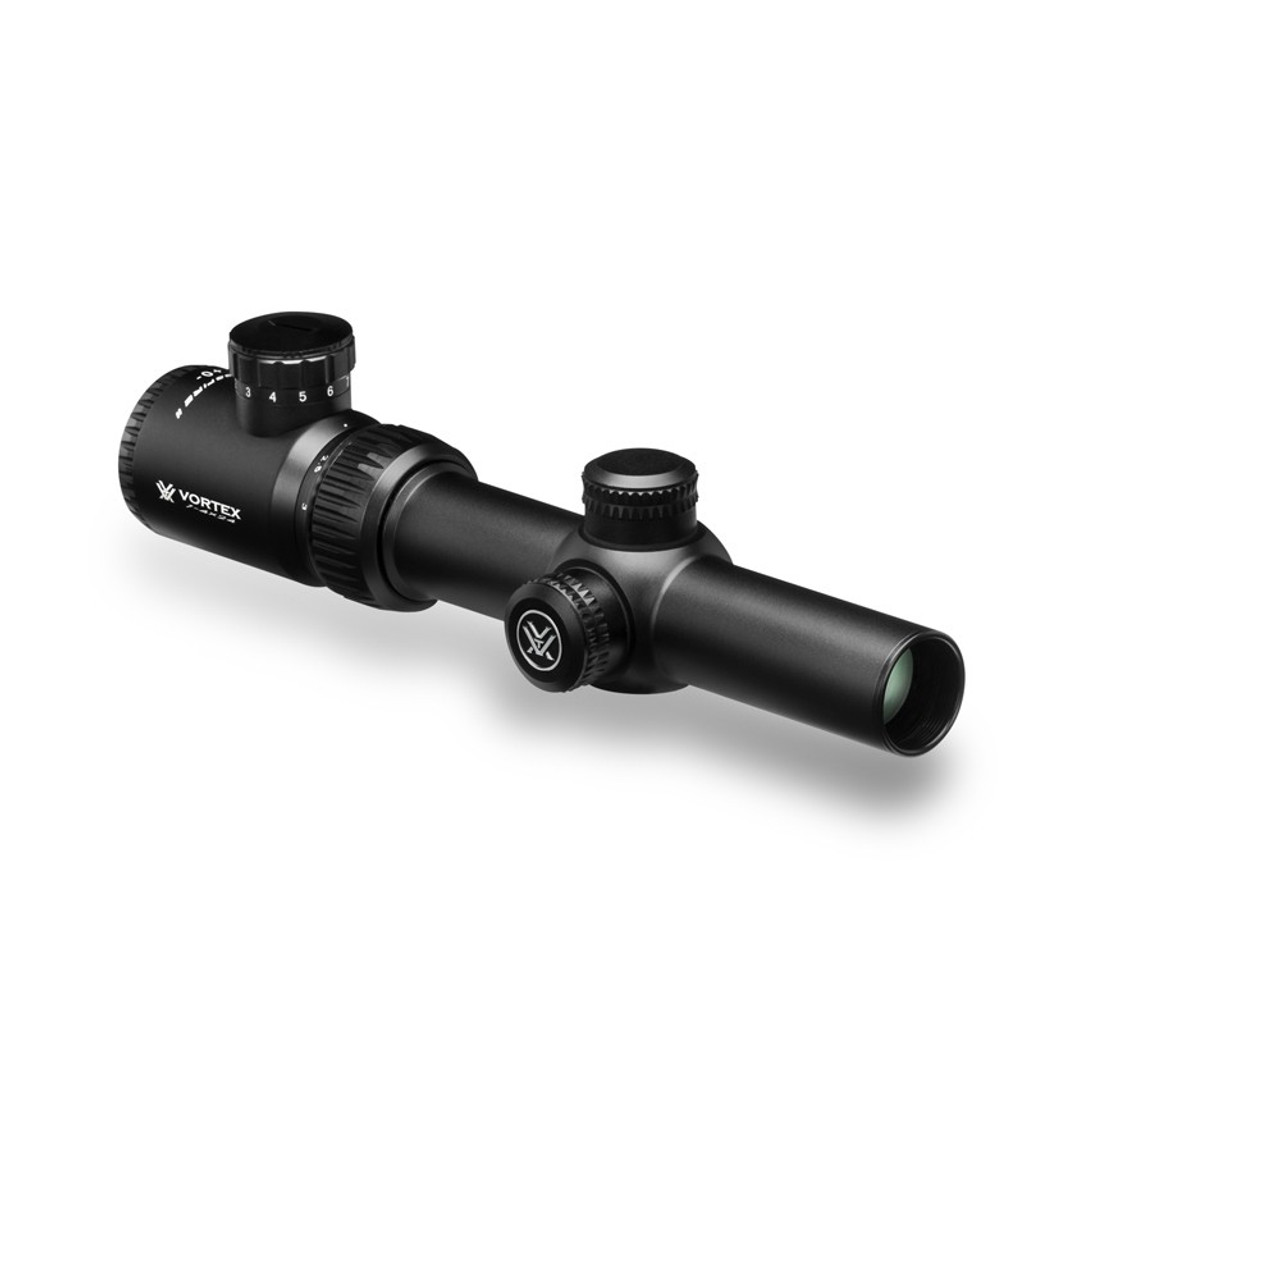 VORTEX CROSSFIRE II 1-4X24 RIFLESCOPE (30MM) V-BRITE
VT-CF2-31037
With long eye relief, a fast-focus eyepiece, fully multi-coated lenses and resettable MOA turrets, there's no compromising on the Crossfire II. Clear, tough and bright, this riflescope hands other value-priced riflescopes their hat. The hard anodized single-piece aircraft-grade aluminum tube is nitrogen purged and o-ring sealed for waterproof/fogproof performance.

SKU	VT-CF2-31037
Magnification	1 – 4
Objective Lens Diameter	24 mm
Eye Relief	4.0 inches
Field of View	96.1–24.1 feet/100 yards
Tube Size	30 mm
Turret Style	Capped
Adjustment Graduation	1/2 MOA
Travel per Rotation	30 MOA
Max Elevation Adjustment	100 MOA
Max Windage Adjustment	100 MOA
Parallax Setting	100 yards
Length	9.61 inches
Weight	14.8 ounces
Riflescope Manual (.pdf)	Download PDF
Included in the Box
Removable lens covers
Lens cloth

 
VIP Unconditional Lifetime Warranty
Crossfire II Dimensions
Lengths
L1	L2	L3	L4	L5	L6
9.61	2.78	1.90	6.17	–	3.44
Heights
H1	H2
1.18	1.73
Dimensions measured in inches.

OPTICAL FEATURES
Fully Multi-Coated	Increases light transmission with multiple anti-reflective coatings on all air-to-glass surfaces.
Second Focal Plane Reticle	Scale of reticle maintains the same ideally-sized appearance. Listed reticle subtensions used for estimating range, holdover and wind drift correction are accurate at the highest magnification.
Illuminated Centre Dot	Provides a precise aiming point under low-light conditions.
CONSTRUCTION FEATURES
Tube Size	30 mm diameter.
Single-Piece Tube	Maximizes alignment for improved accuracy and optimum visual performance, as well as ensures strength and waterproofness.
Aircraft-Grade Aluminum	Constructed from a solid block of aircraft-grade aluminum for strength and rigidity.
Waterproof	O-ring seals prevent moisture, dust and debris from penetrating the riflescope for reliable performance in all environments.
Fogproof	Nitrogen gas purging prevents internal fogging over a wide range of temperatures.
Shockproof	Rugged construction withstands recoil and impact.
Hard Anodized Finish	Highly durable low-glare matte finish helps camouflage the shooter's position.
Capped Reset Turrets	Allow re-indexing of the turret to zero after sighting in the riflescope. Caps provide external protection for turret.
CONVENIENCE FEATURES
Fast Focus Eyepiece	Allows quick and easy reticle focusing.